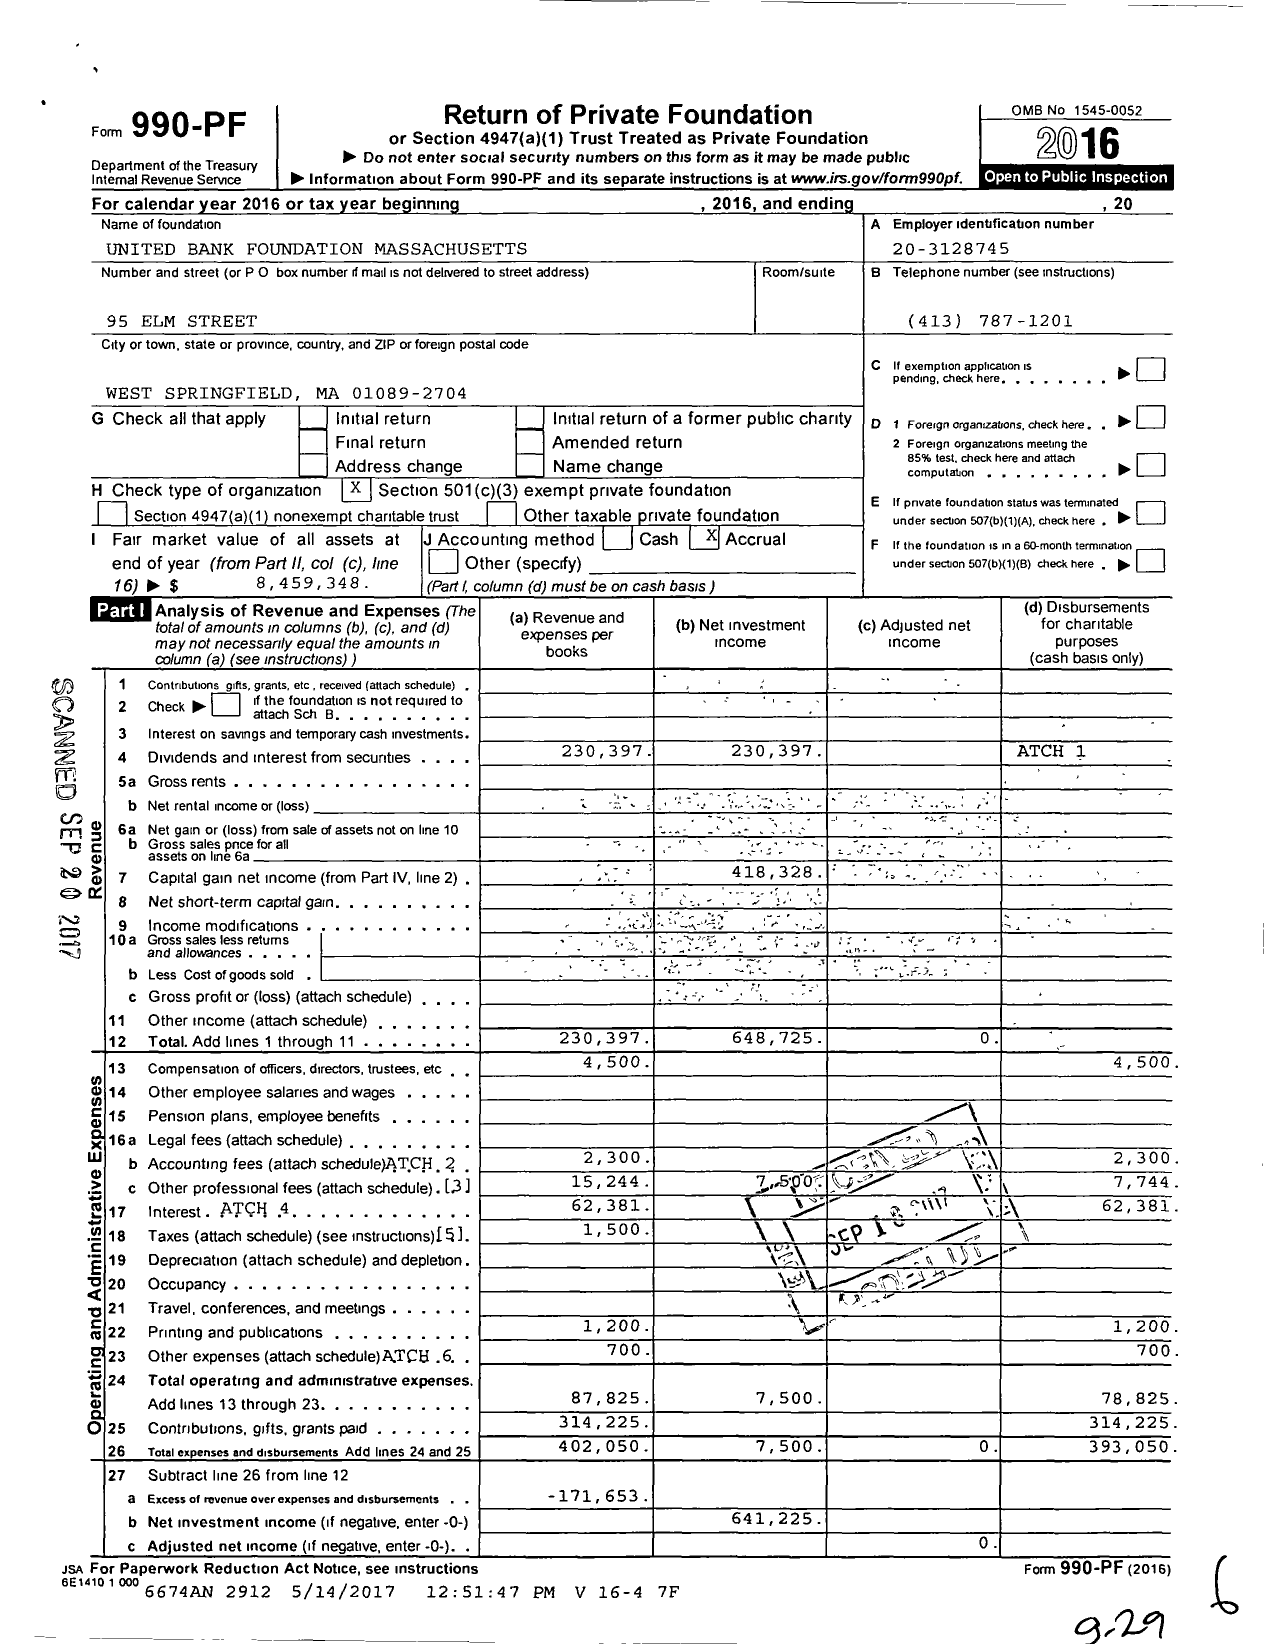 Image of first page of 2016 Form 990PF for United Bank Foundation Massachusetts